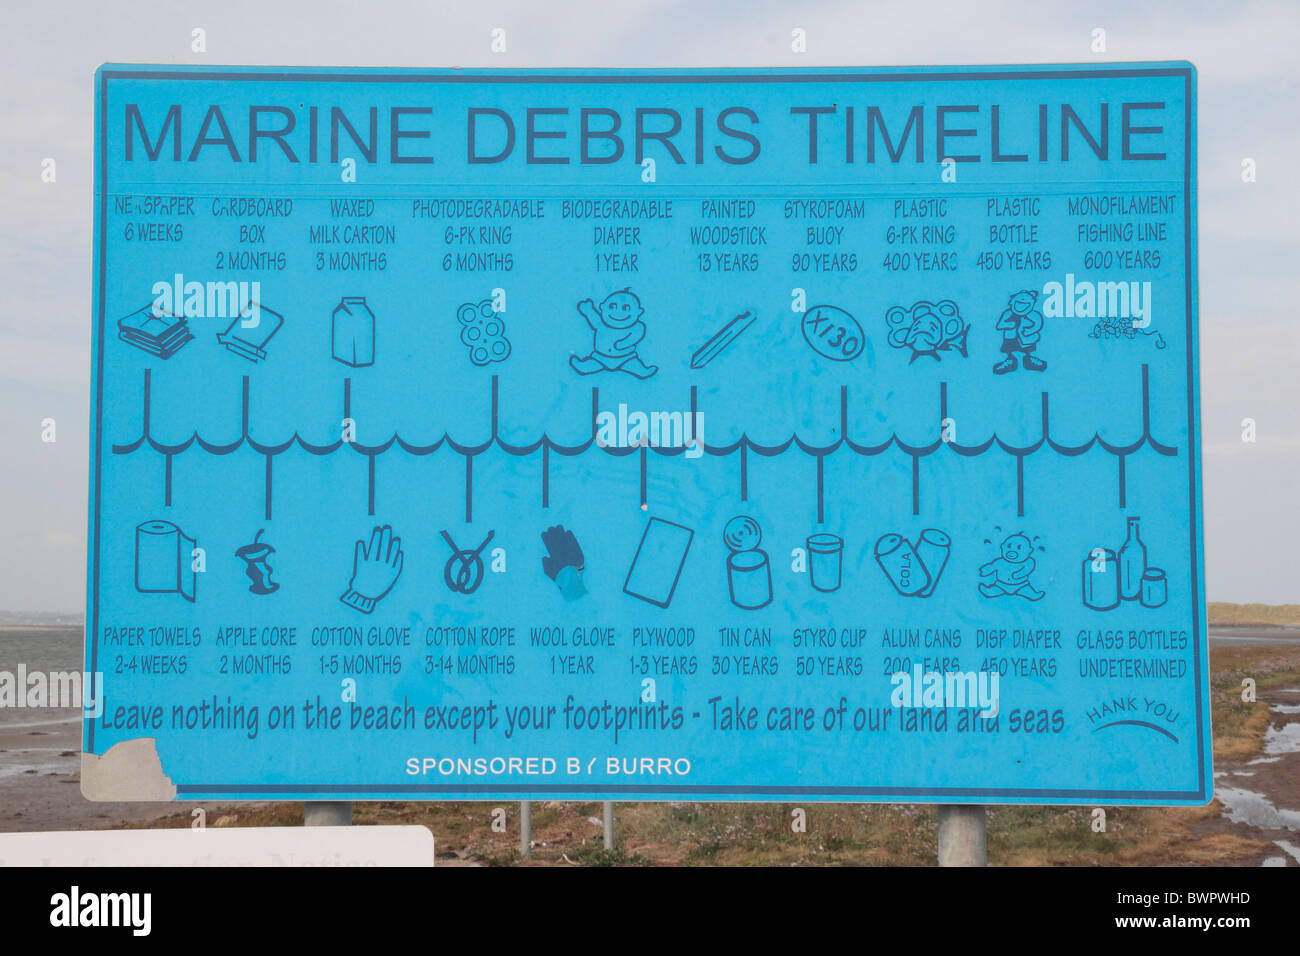 A large Marine Debris Timeline sign on the coast of Wexford near Rosslare advising on the environmental impact of rubbish. Stock Photo